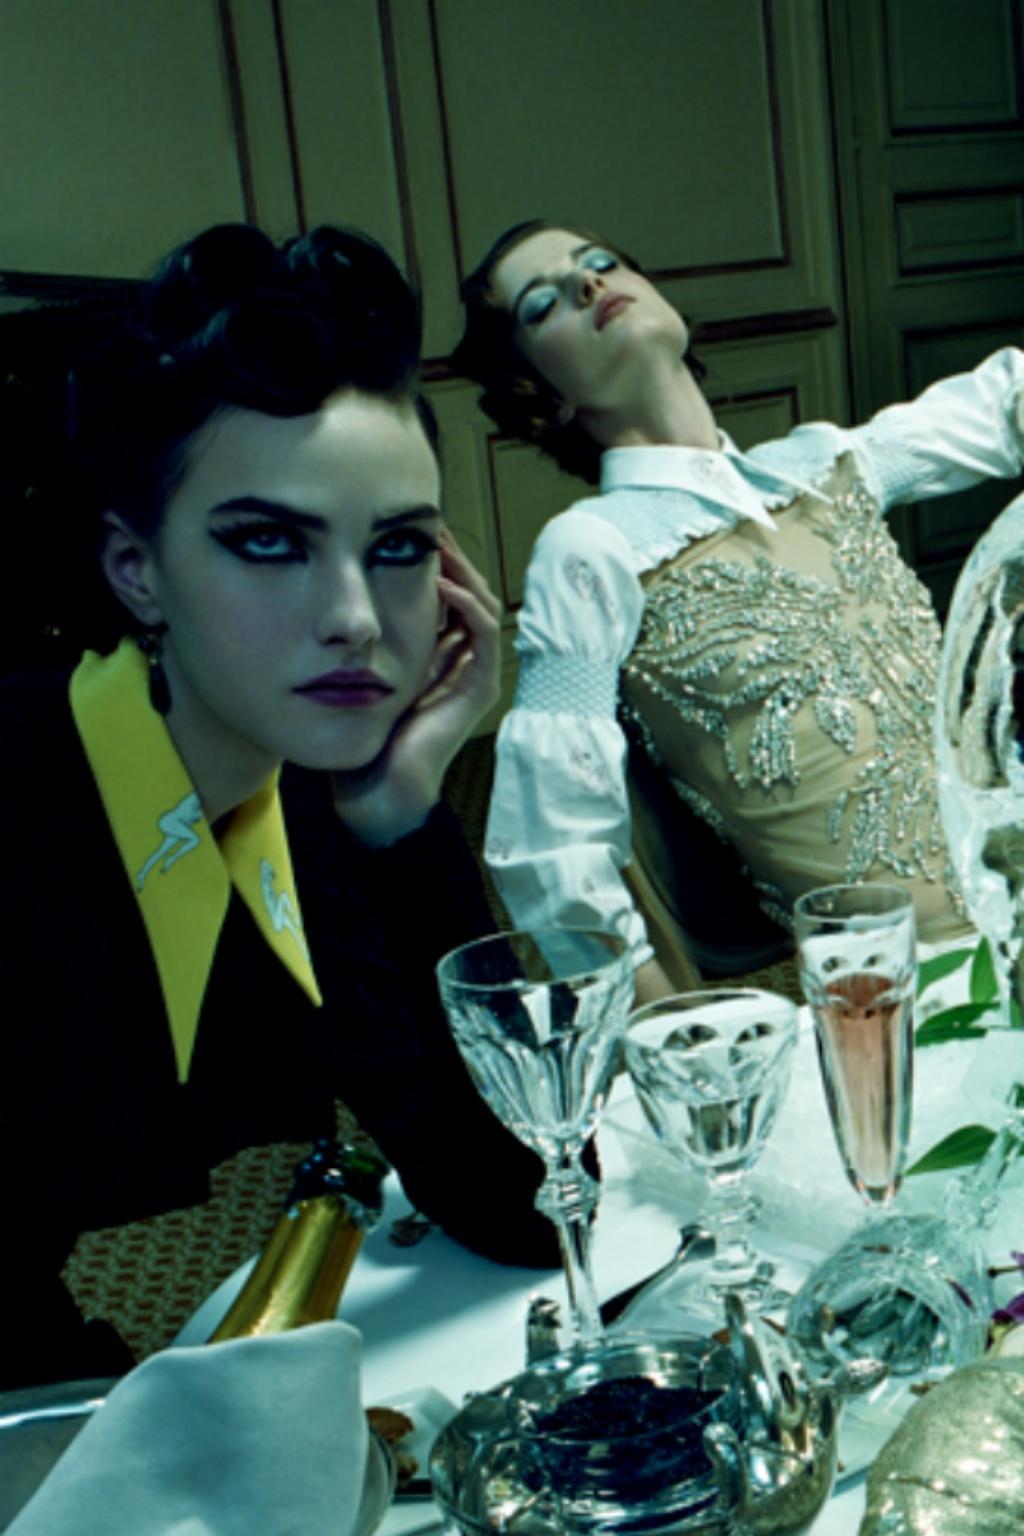 Miles ALDRIDGE (*1964, Great Britain)
Dinner Party #8, 2009
Chromogenic print
Image 101.5 x 152.5 (40 x 60 in.) 
Sheet 113.5 x 164.5 cm (44 5/8 x 64 3/4 in.)
Edition of 6, plus 2 AP; Ed. 1/6
Print only

A fiercely original photographer, Miles